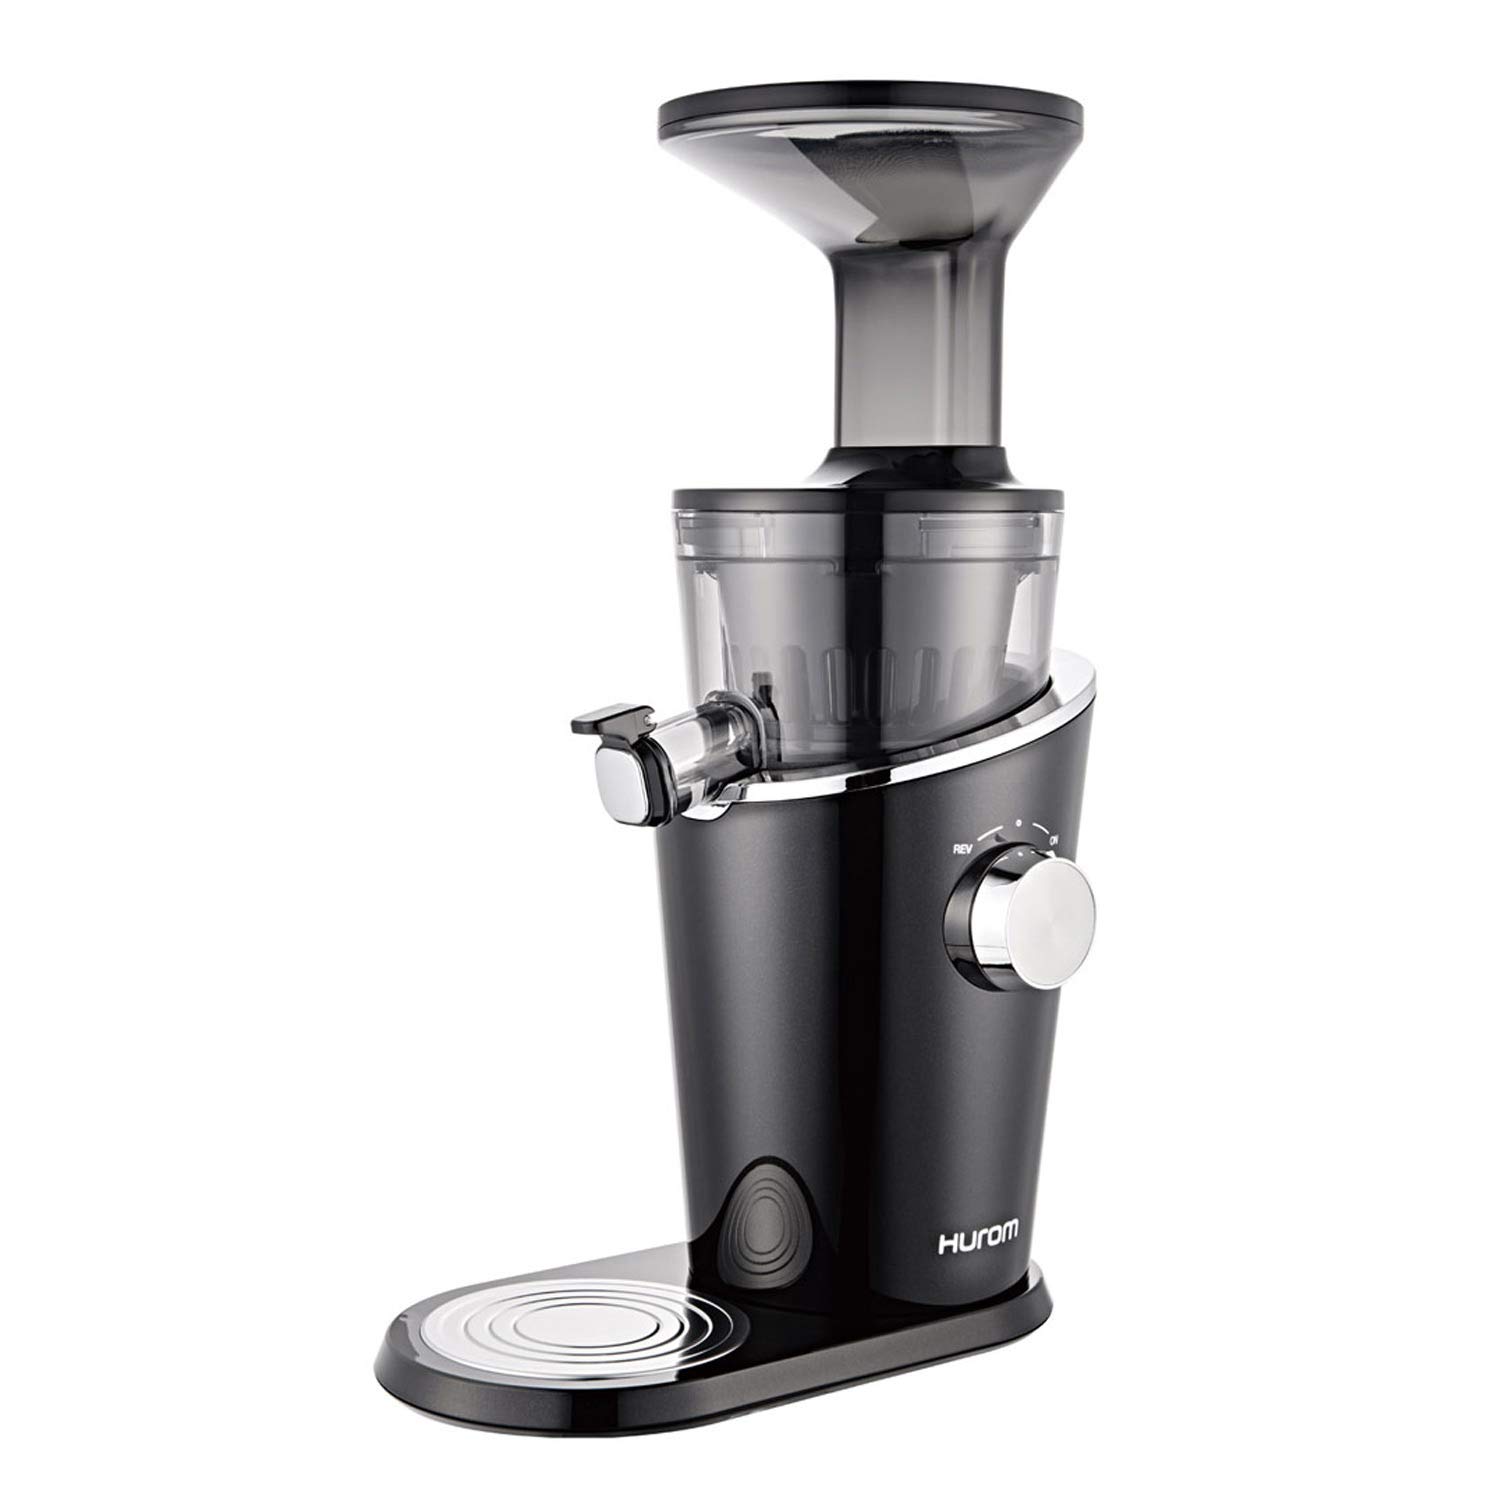 commercial slow juicer from Hurom review